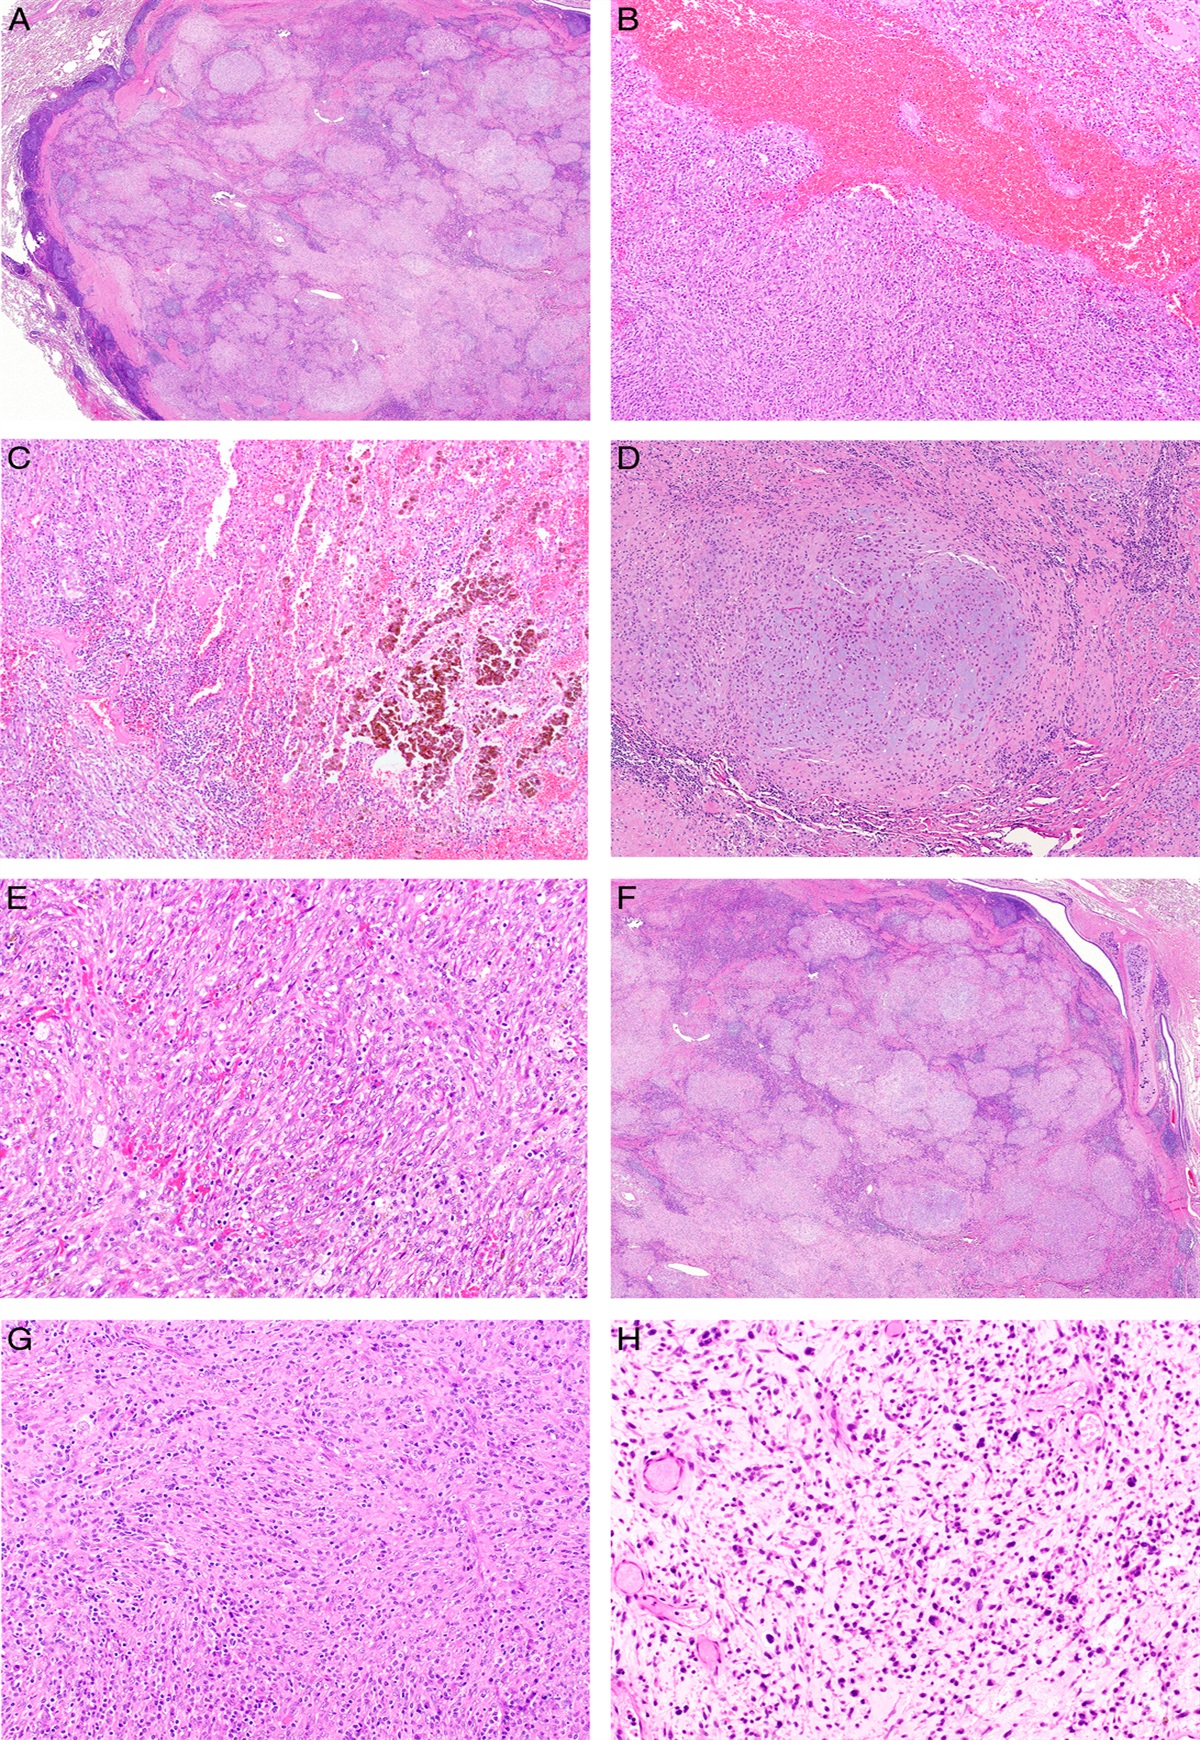 Primary Pulmonary Myxoid Sarcoma and Thoracic Angiomatoid Fibrous Histiocytoma: Two Sides of the Same Coin?